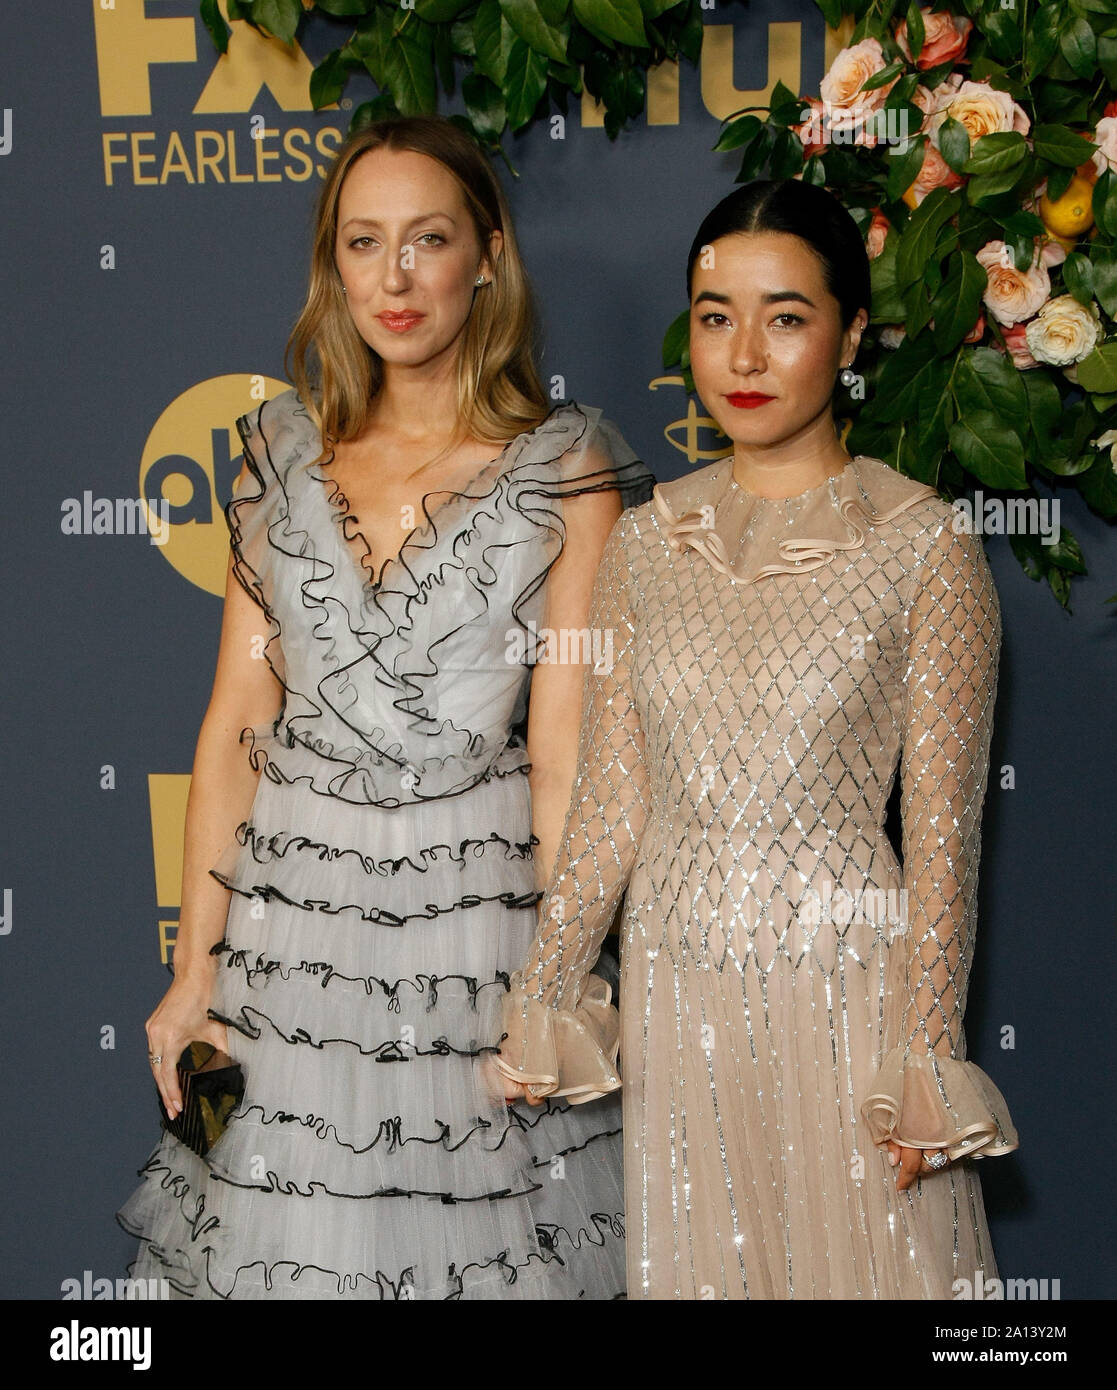 Los Angeles, USA. 22nd Sep 2019. Anna Konkle, Maya Erskine arrive at the Walt Disney Television Emmy Party on September 22, 2019 in Los Angeles, California. Photo: CraSH/imageSPACE/MediaPunch Credit: MediaPunch Inc/Alamy Live News Stock Photo